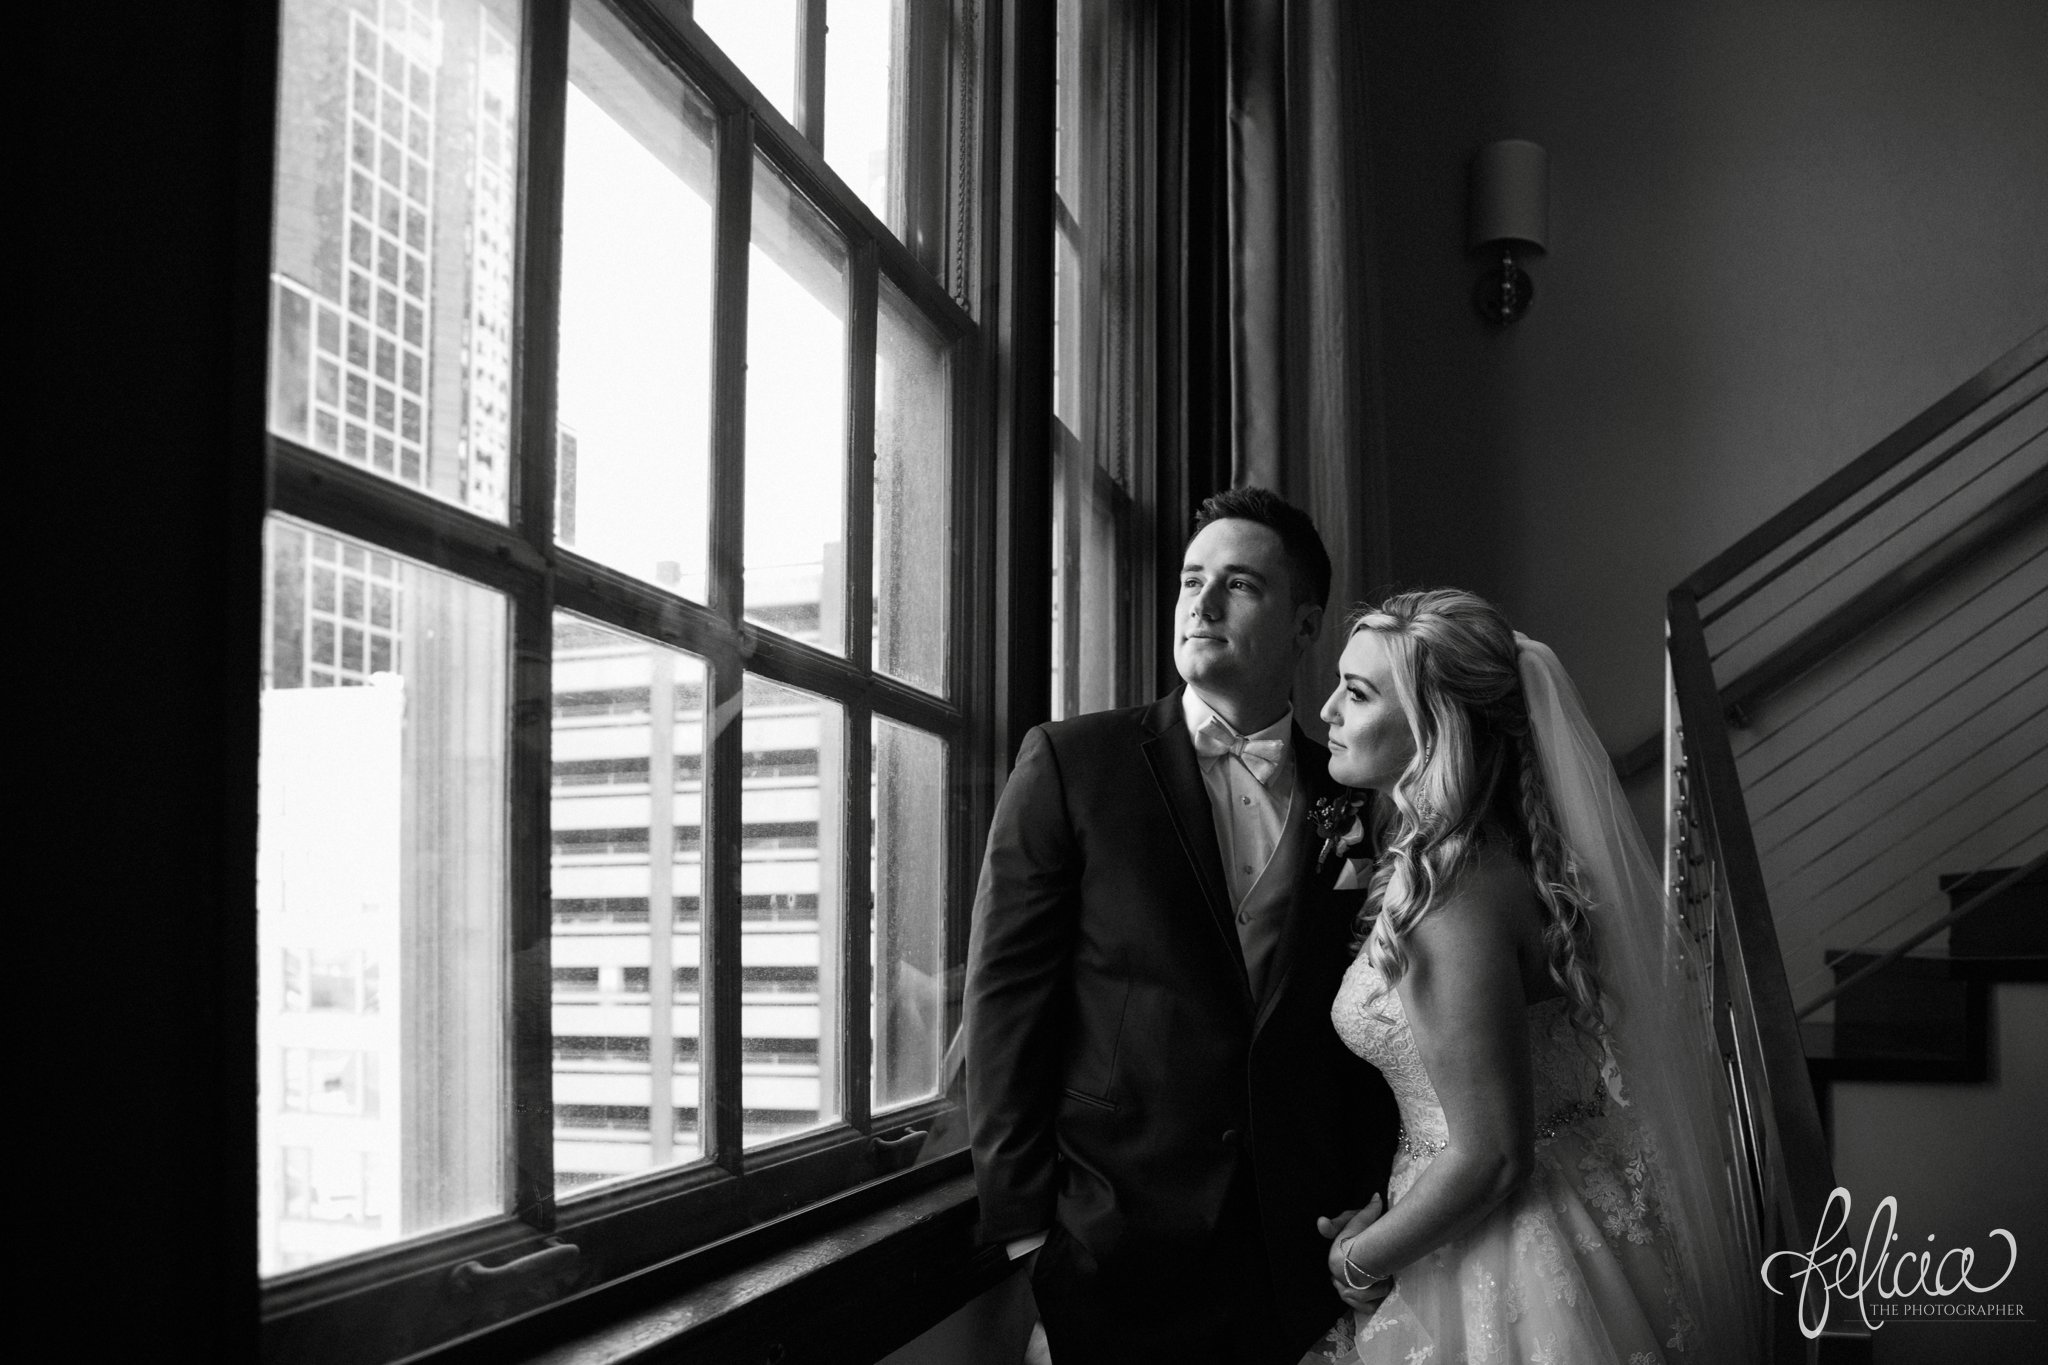 images by feliciathephotographer.com | wedding photographer | downtown kansas city | first look | hotel ambassador | natural lighting | romantic | belle vogue | mens warehouse | glamorous | intimate | black and white | 